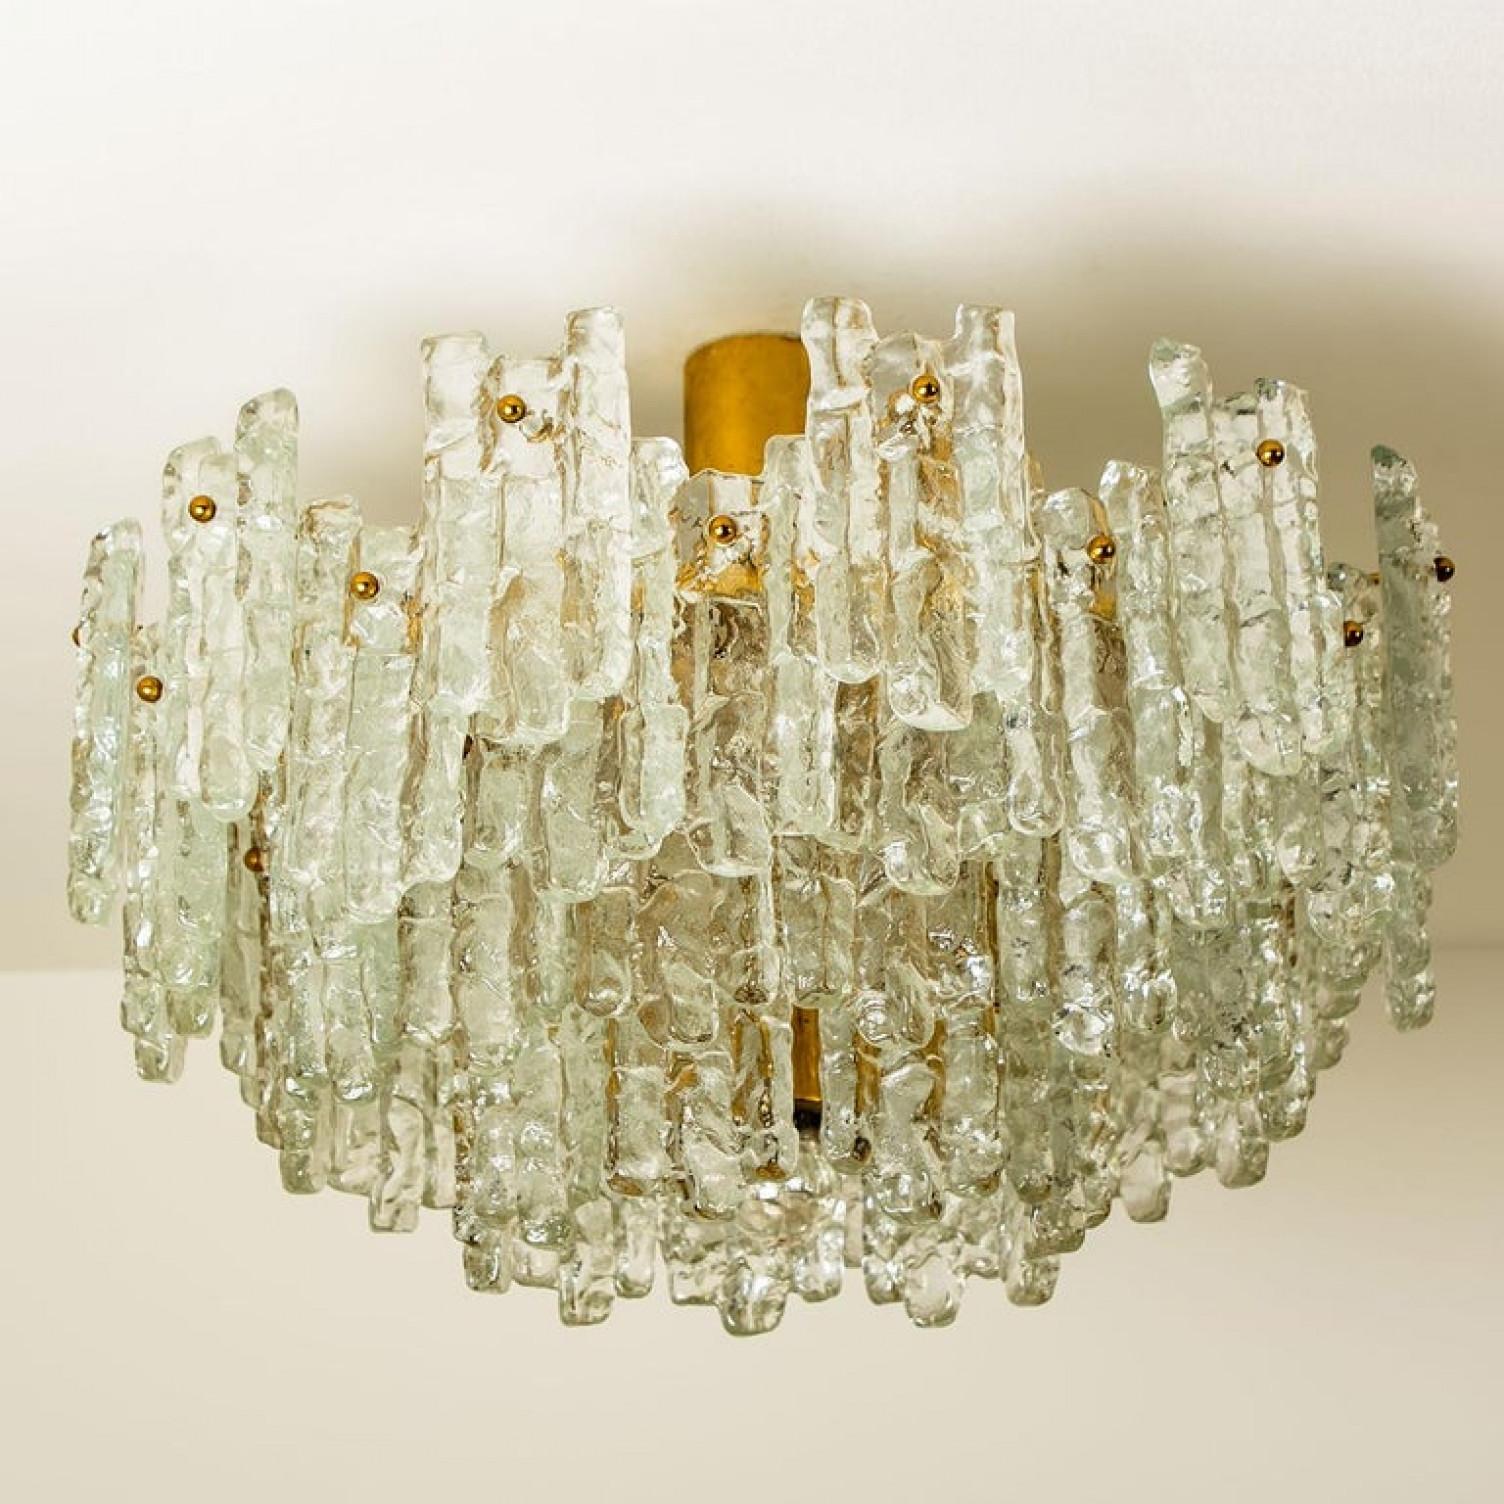 Austrian 1 of the 2 Exceptional Huge Glass Flush Mount /Chandeliers by J.T. Kalmar, 1960s For Sale